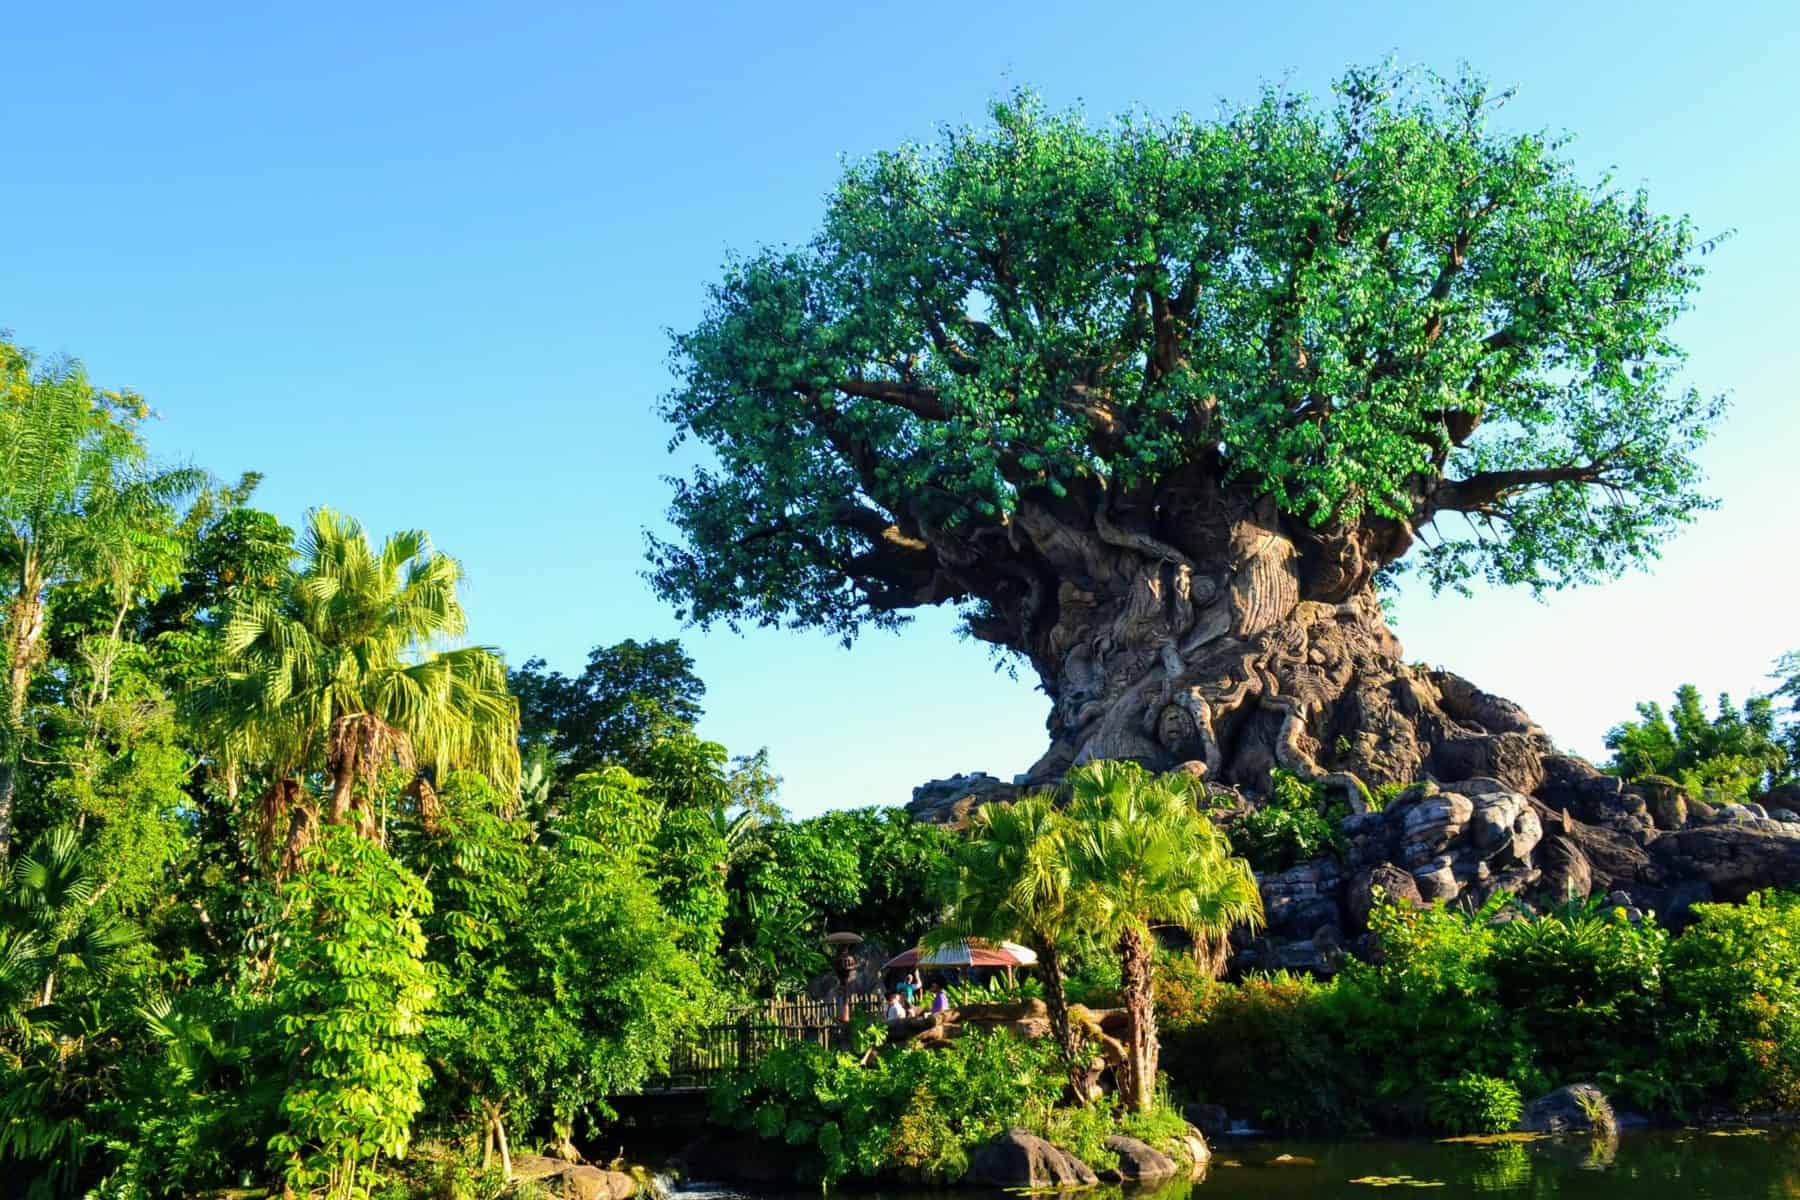 Guide to Animal Kingdom Park Hours in 2023